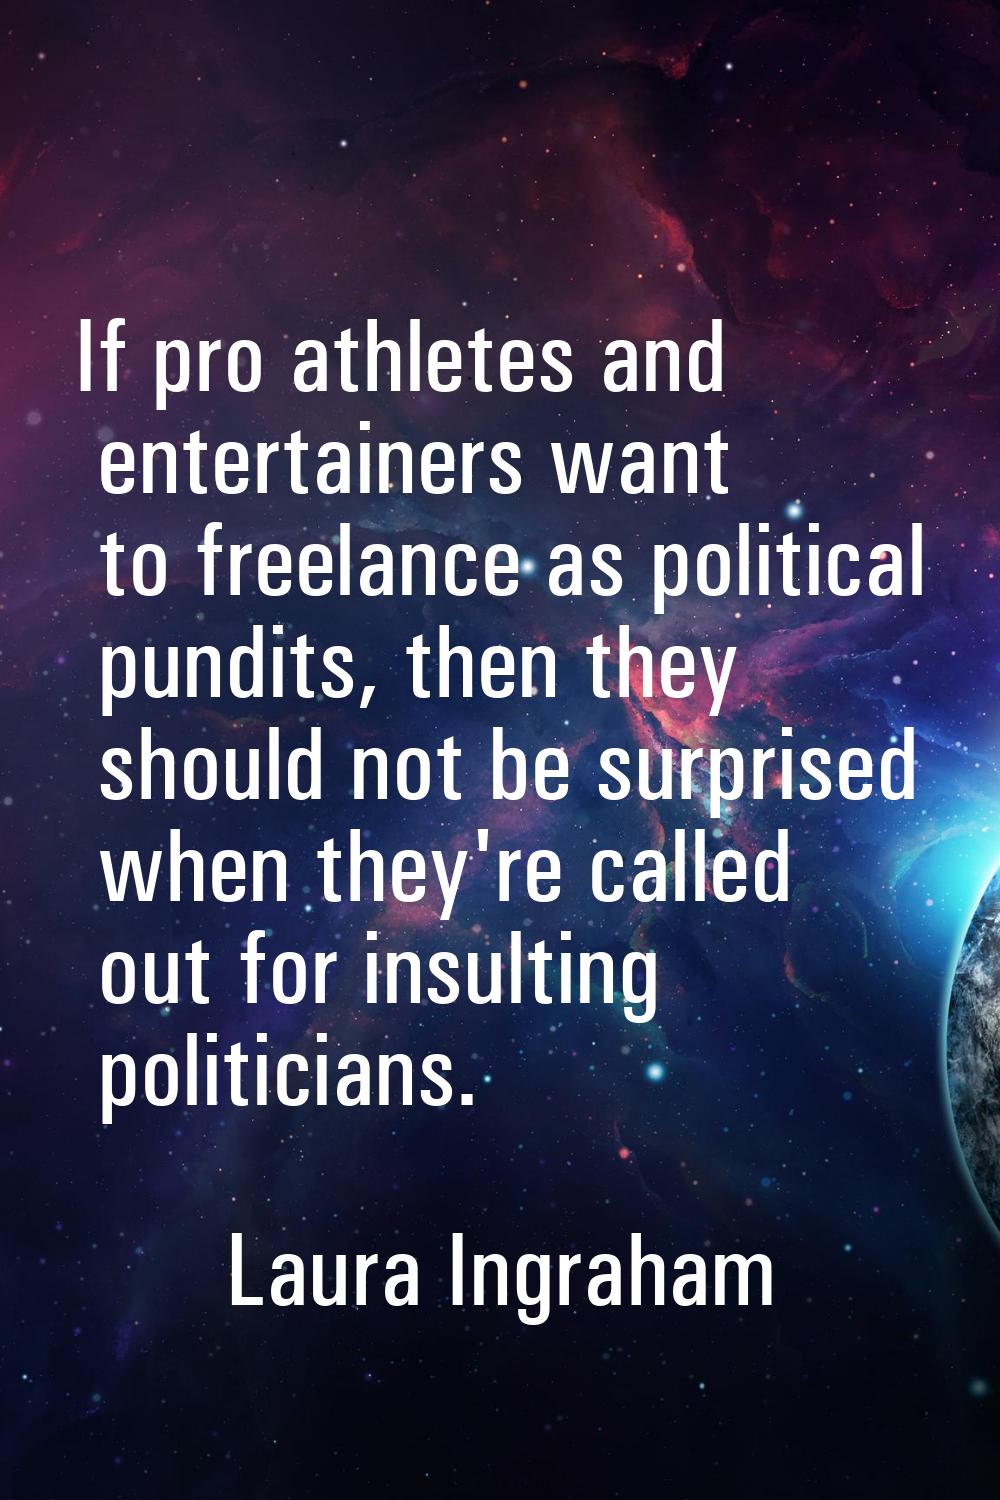 If pro athletes and entertainers want to freelance as political pundits, then they should not be su